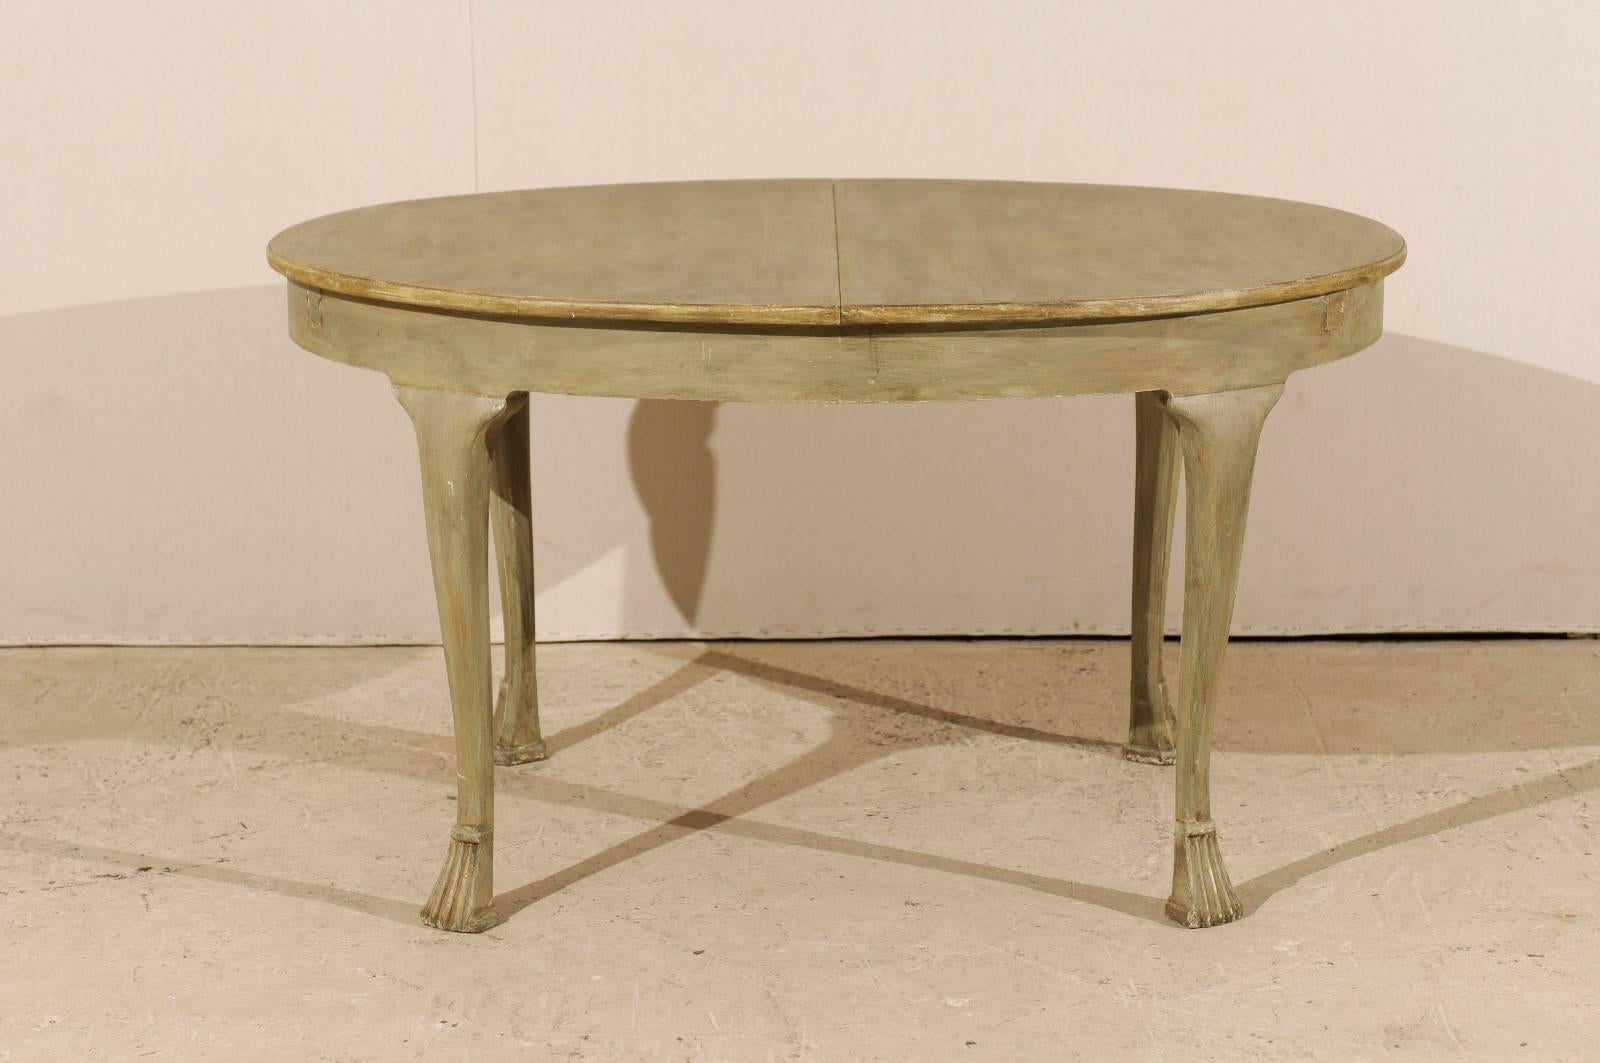 A European 19th century oval table. This painted wood table (circa 1880) is raised on four Spanish style feet and comes with two hideaways leaves. The table top separates in its center to give space for the leaves. The table of a light grey green